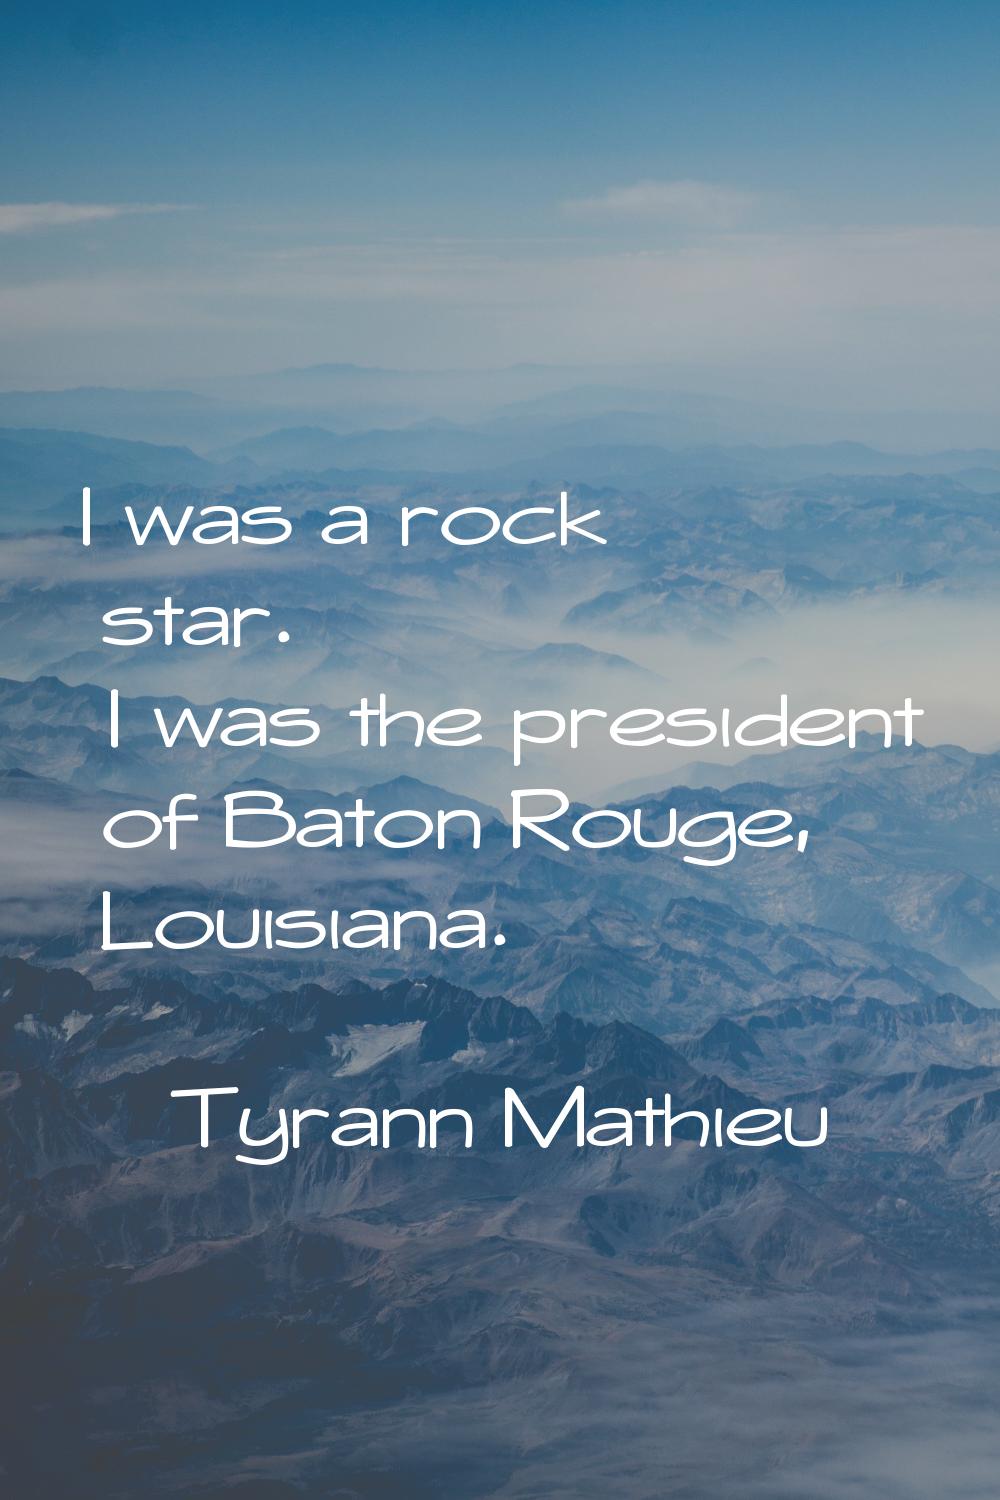 I was a rock star. I was the president of Baton Rouge, Louisiana.